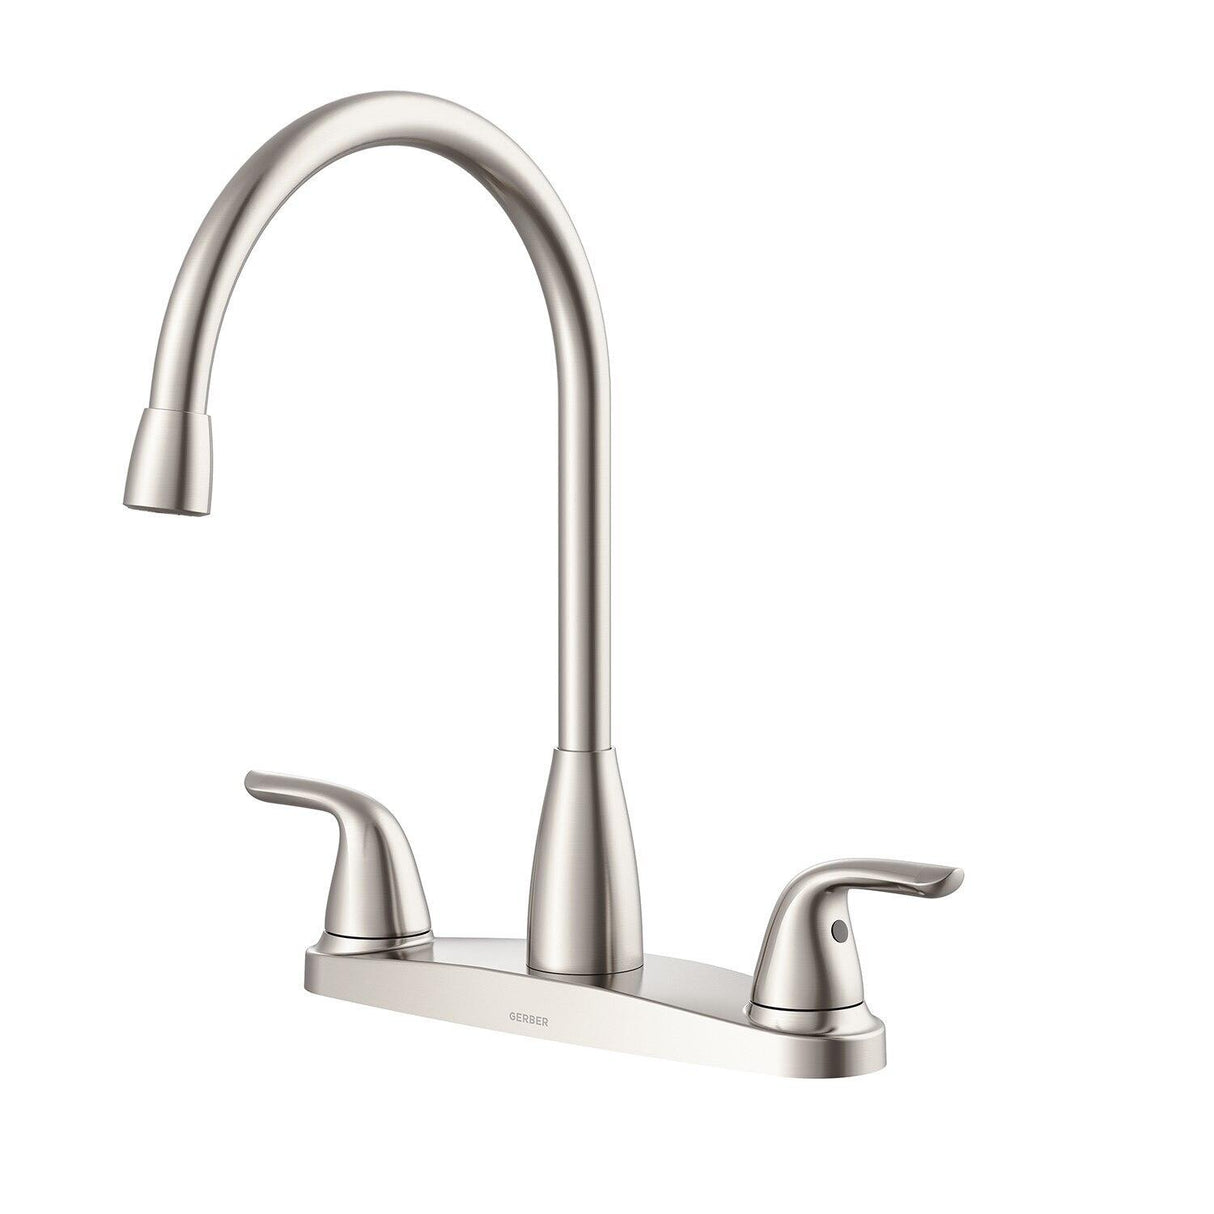 Gerber G0040168 Viper Two Handle High-arc Kitchen Faucet W/out Sidespray - Chrome